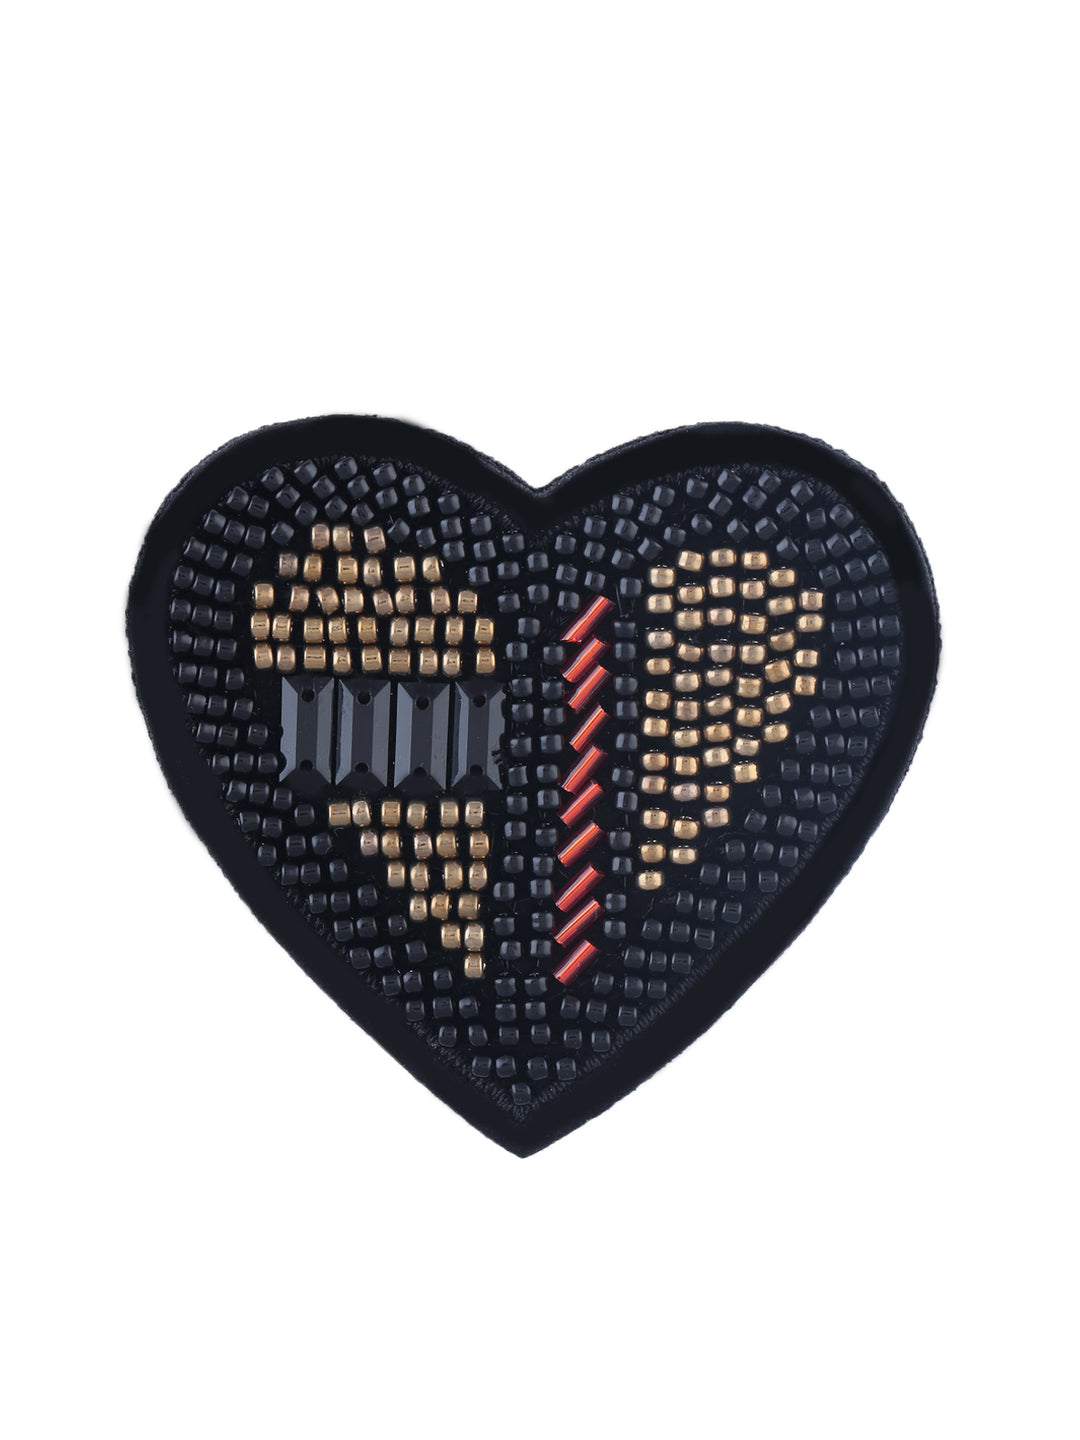 Decorative Black with Multicolor Beaded Heart Patch